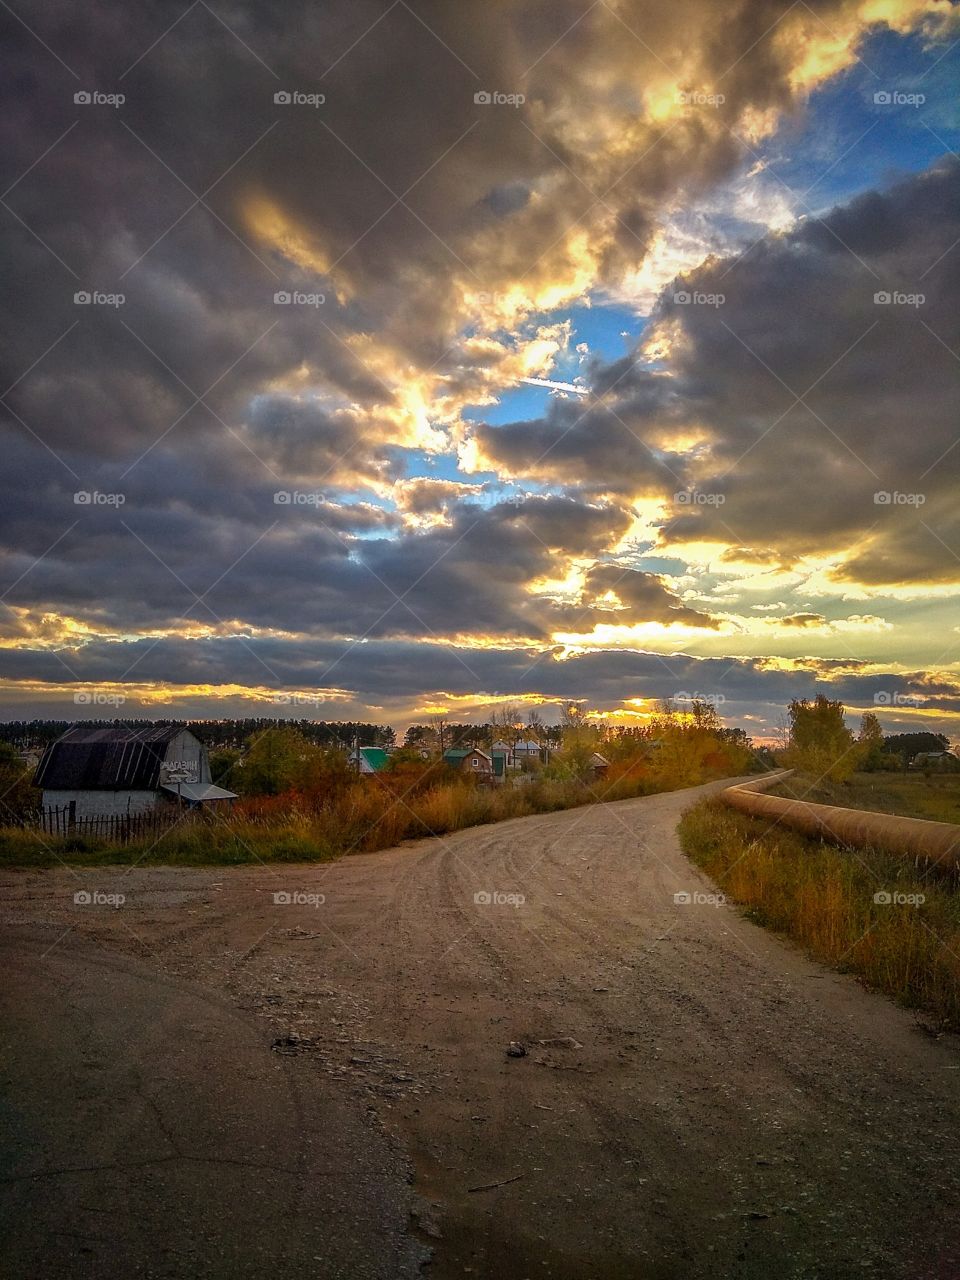 Beautiful view of the road leading to the dacha village and the houses of this village under the magnificent evening sky covered with clouds and breaking through the clouds by the rays of the setting sun in the autumn evening